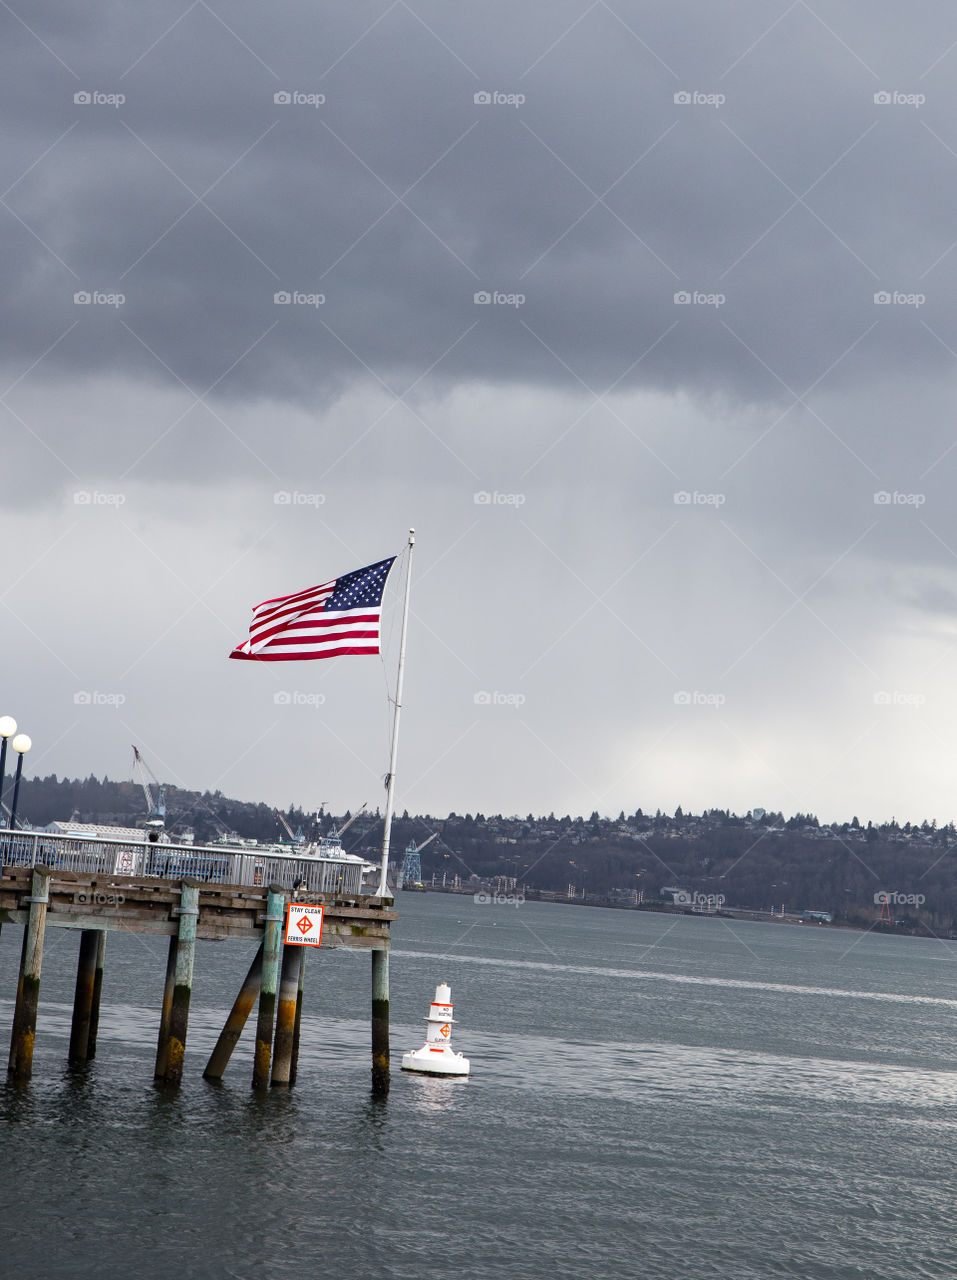 Dark clouds are coming in over US - symbolic image with the union jack